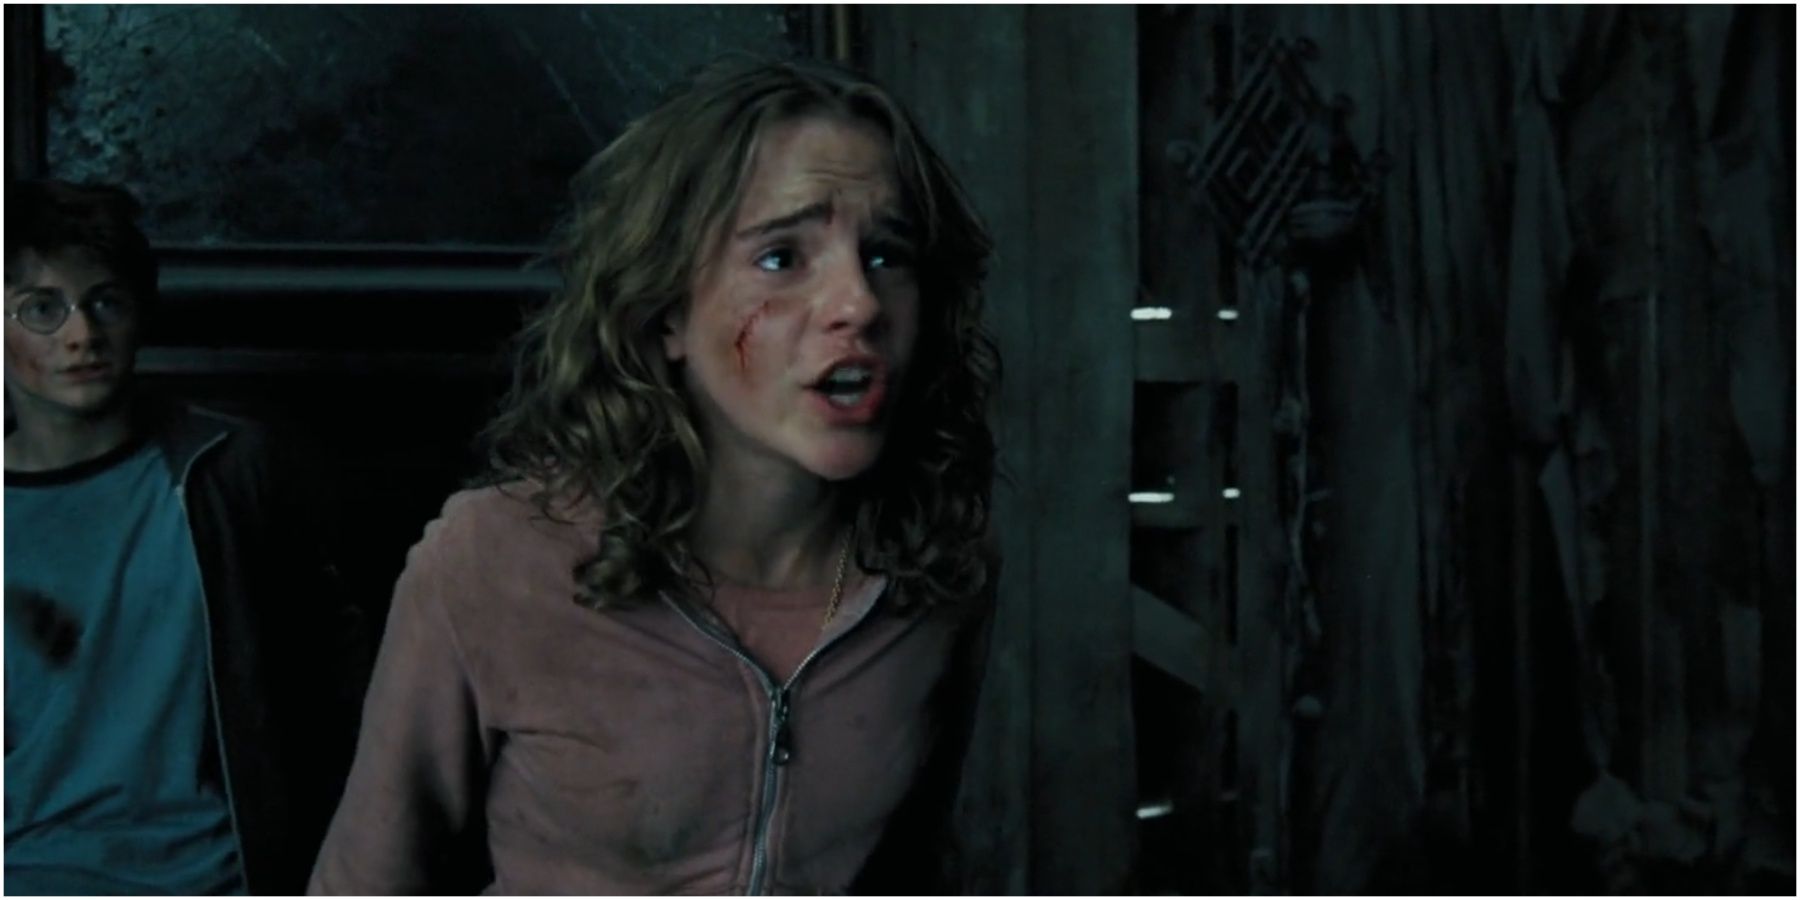 Harry Potter and Hermione Granger in Harry Potter and the Prisoner of Azkaban.